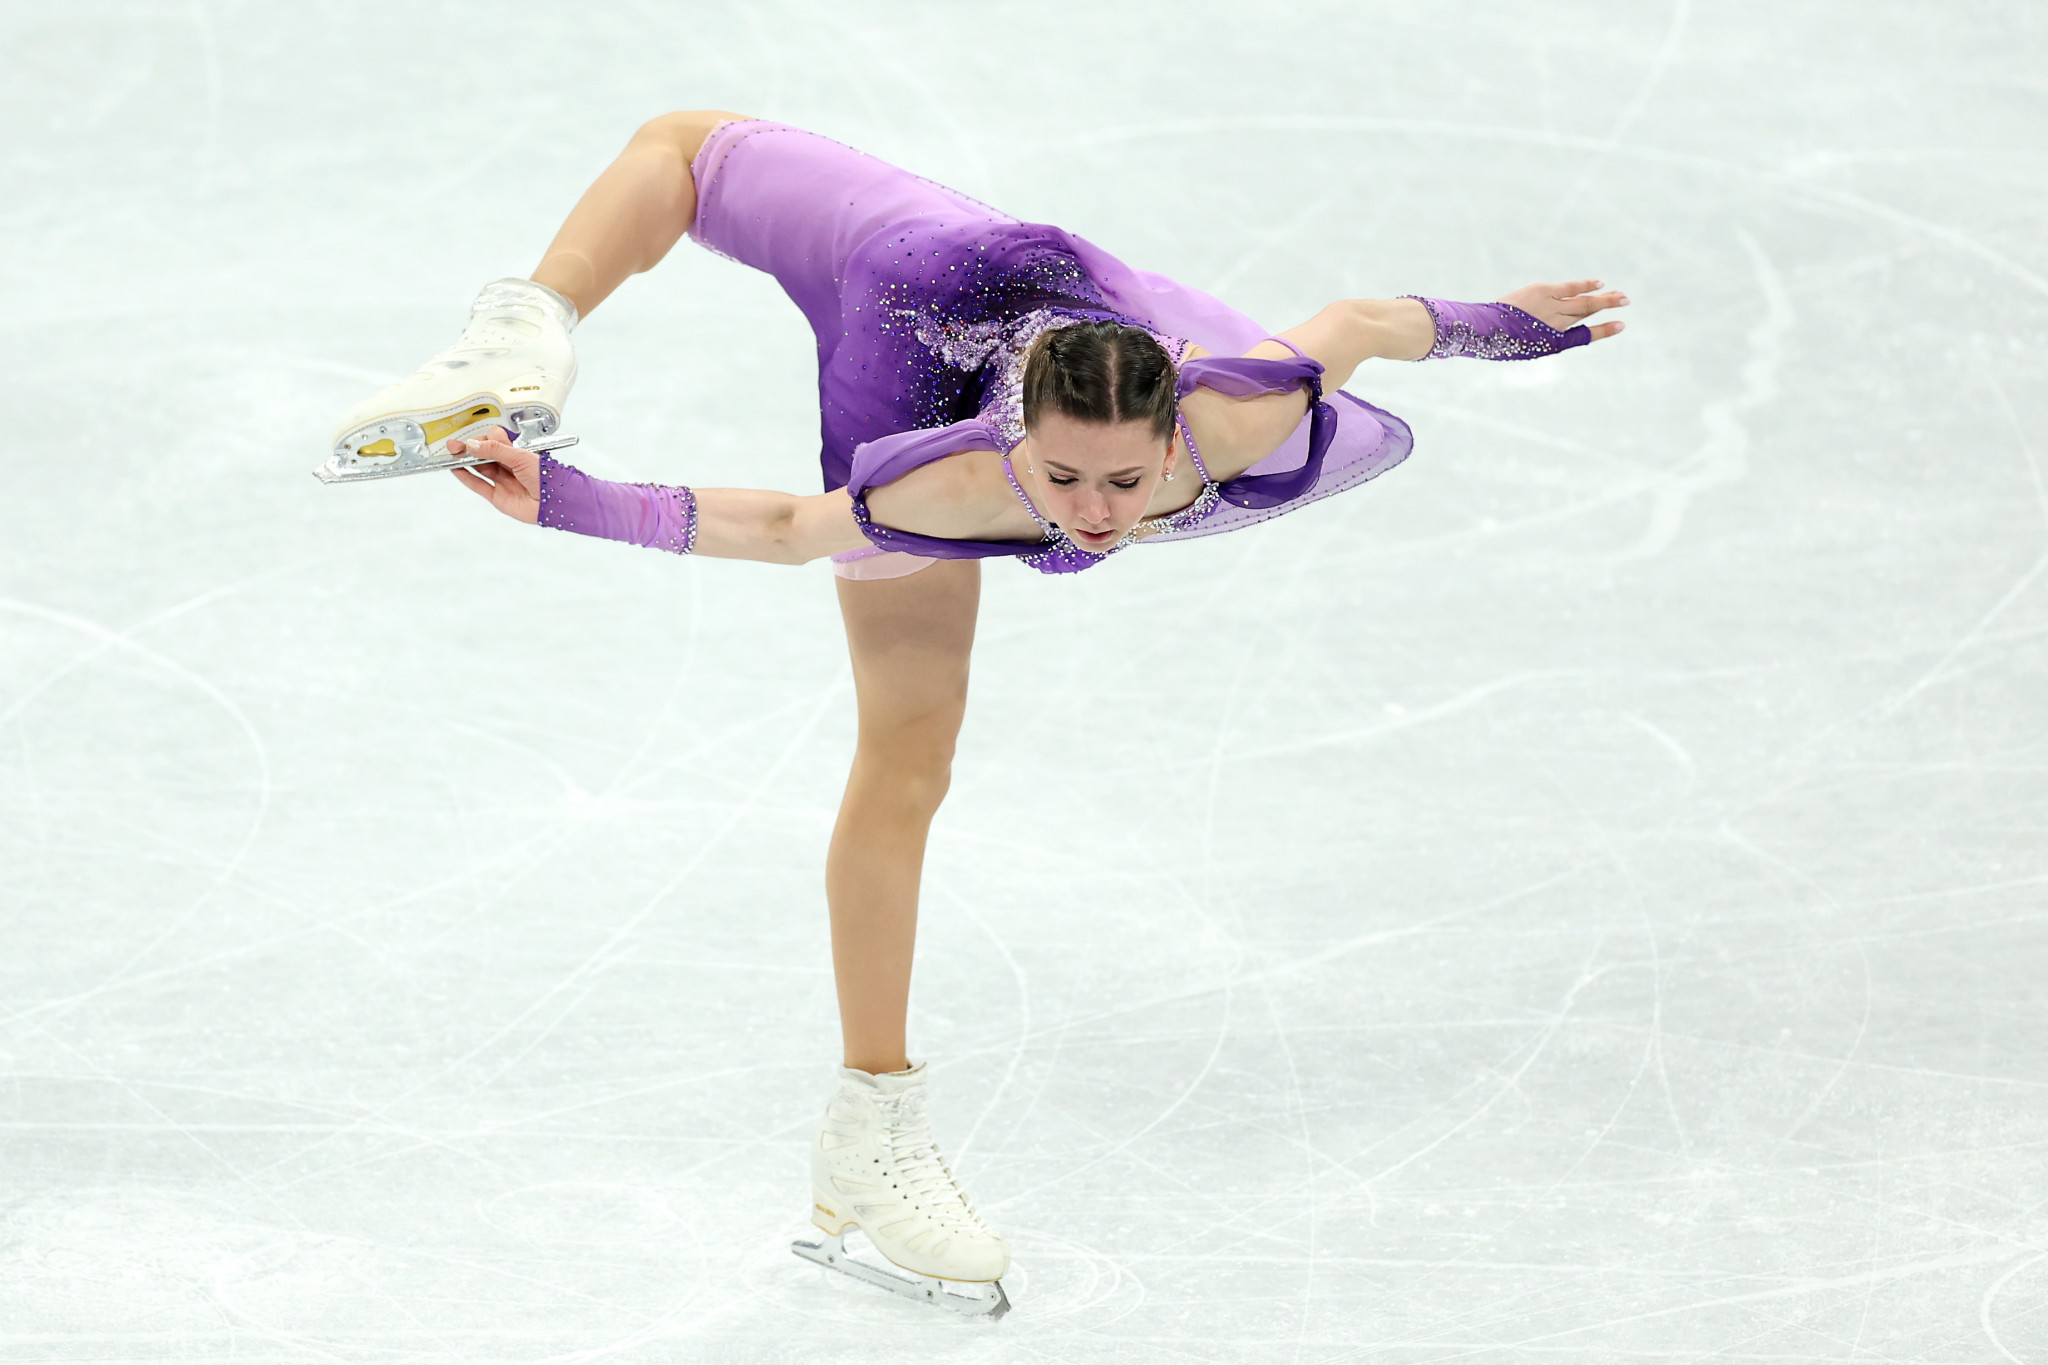 Fifteen-year-old Kamila Valieva dazzled with the best score in the women's short programme segment of the team figure skating event, helping the ROC top the standings with a day to go ©Getty Images